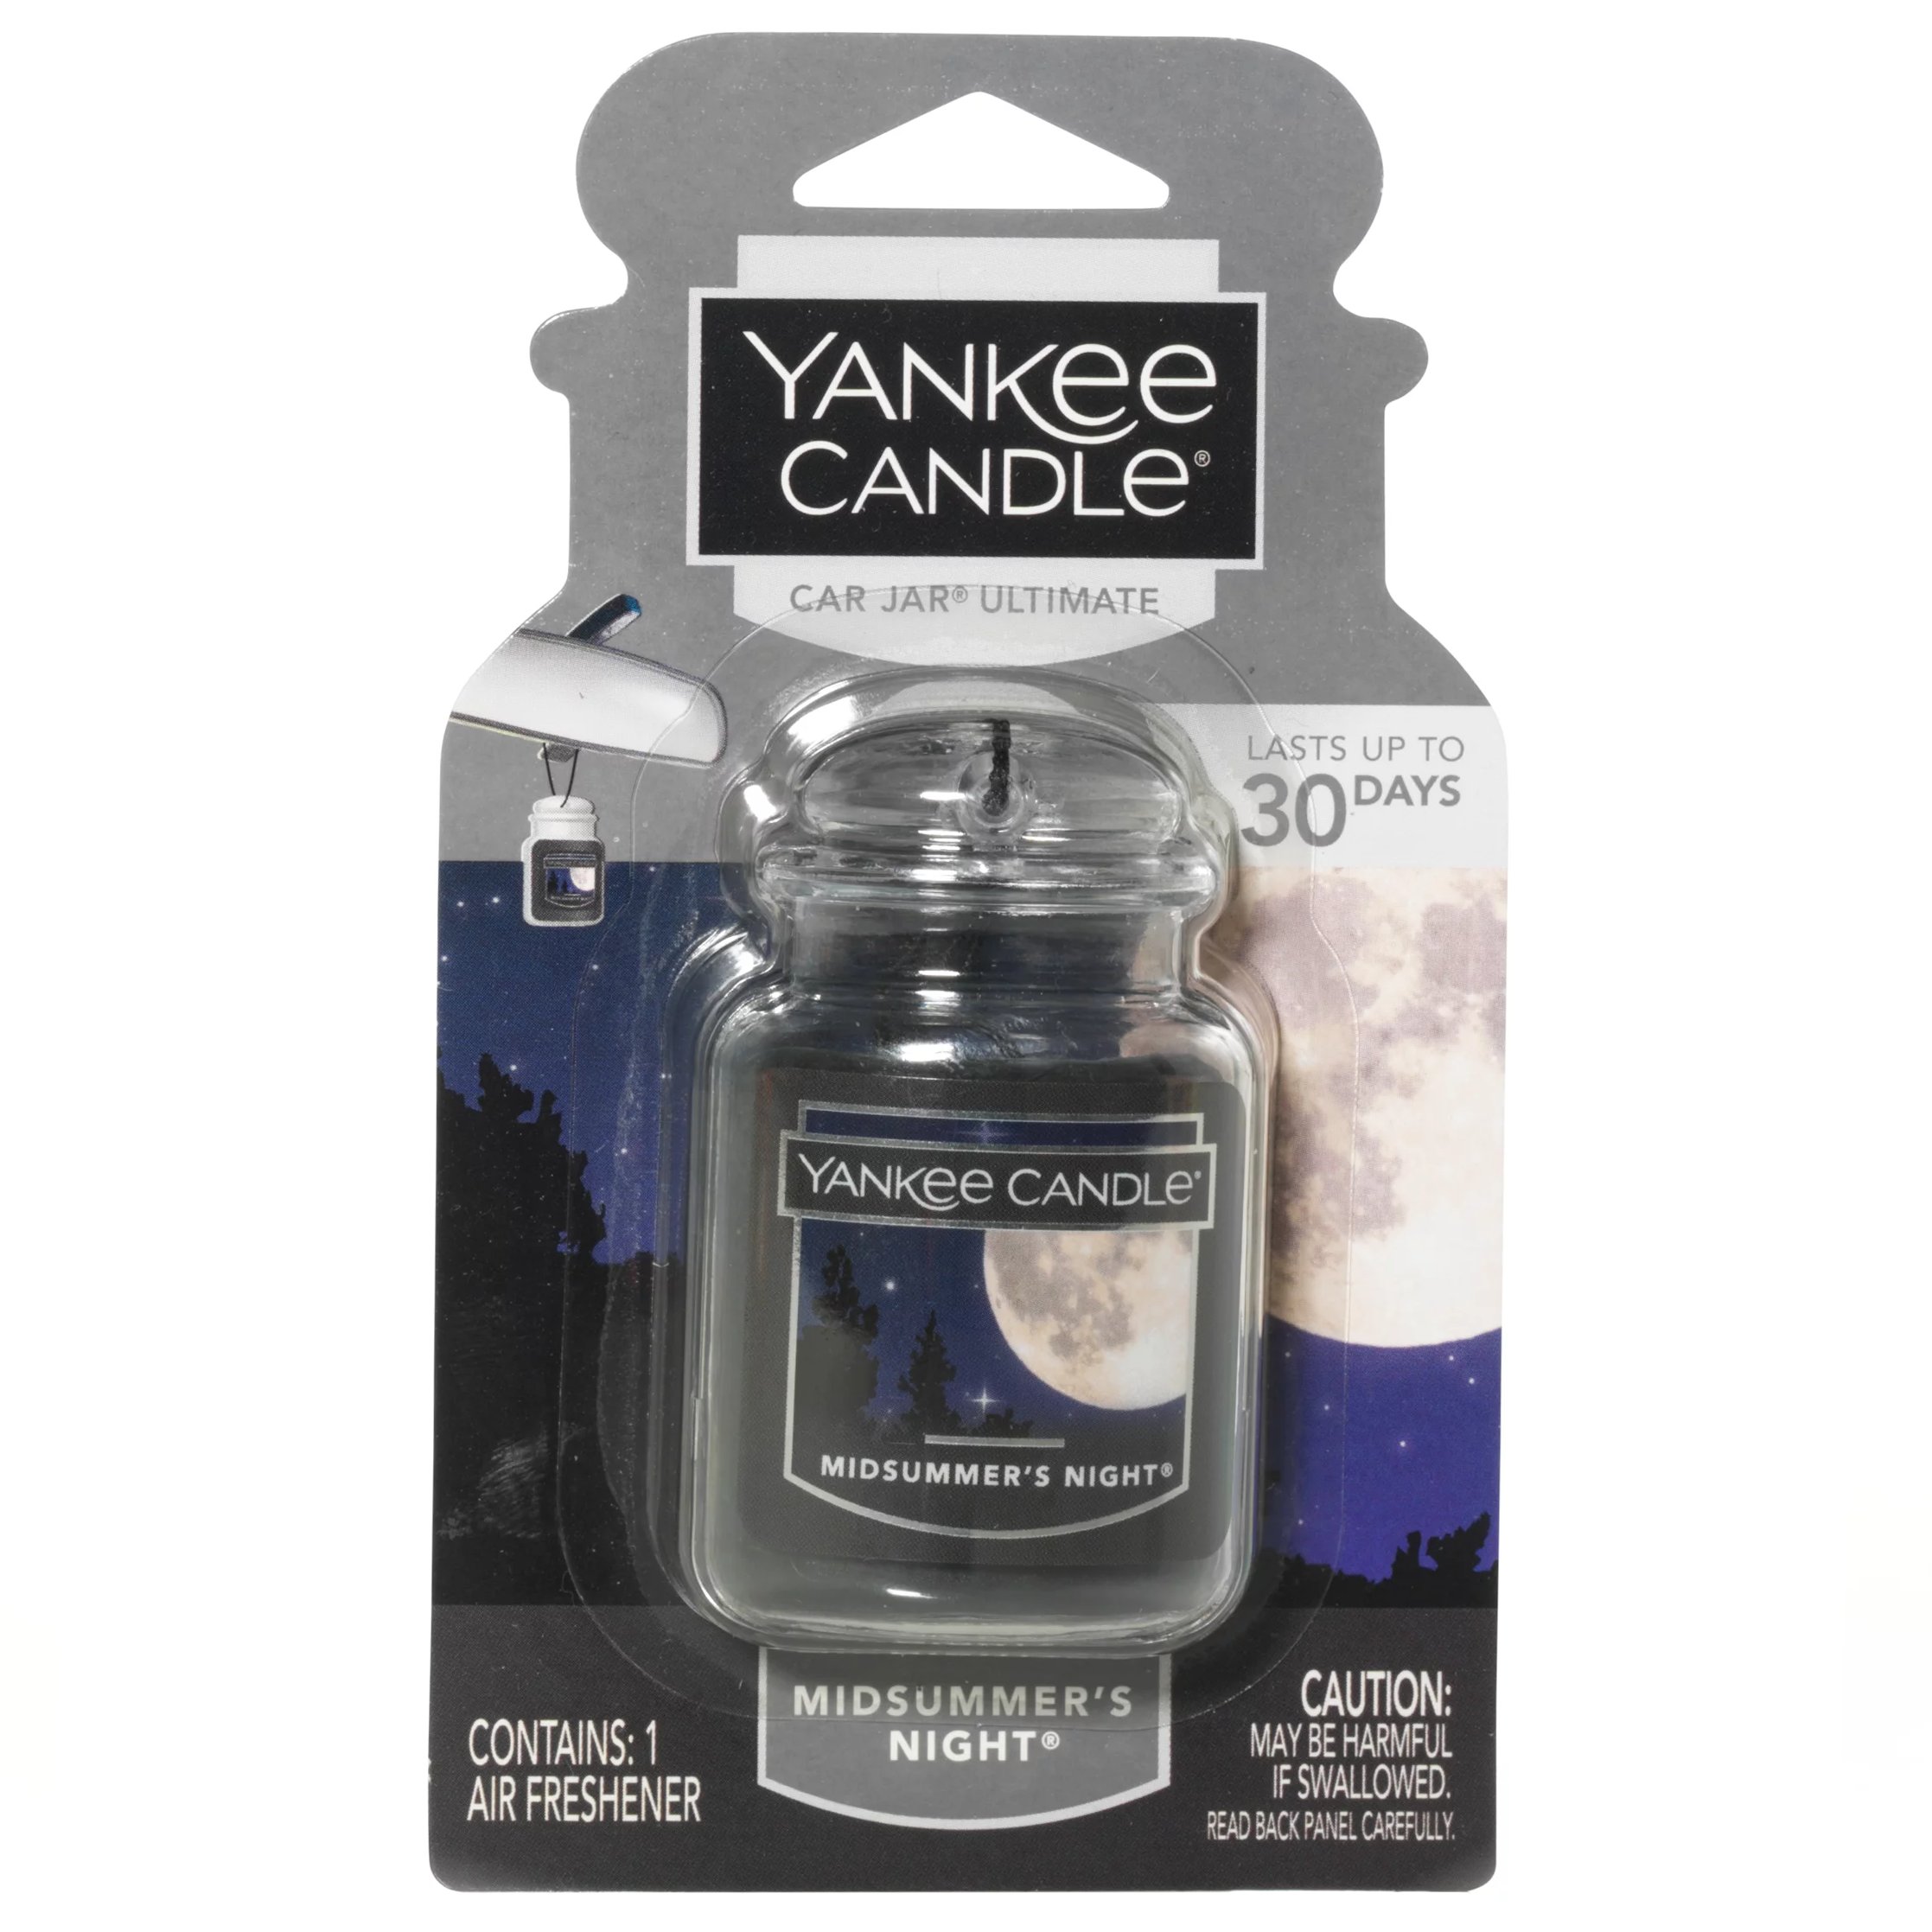 Midsummer's Night Yankee Candle Whole Home Air Freshener 10.5 g Fragrance